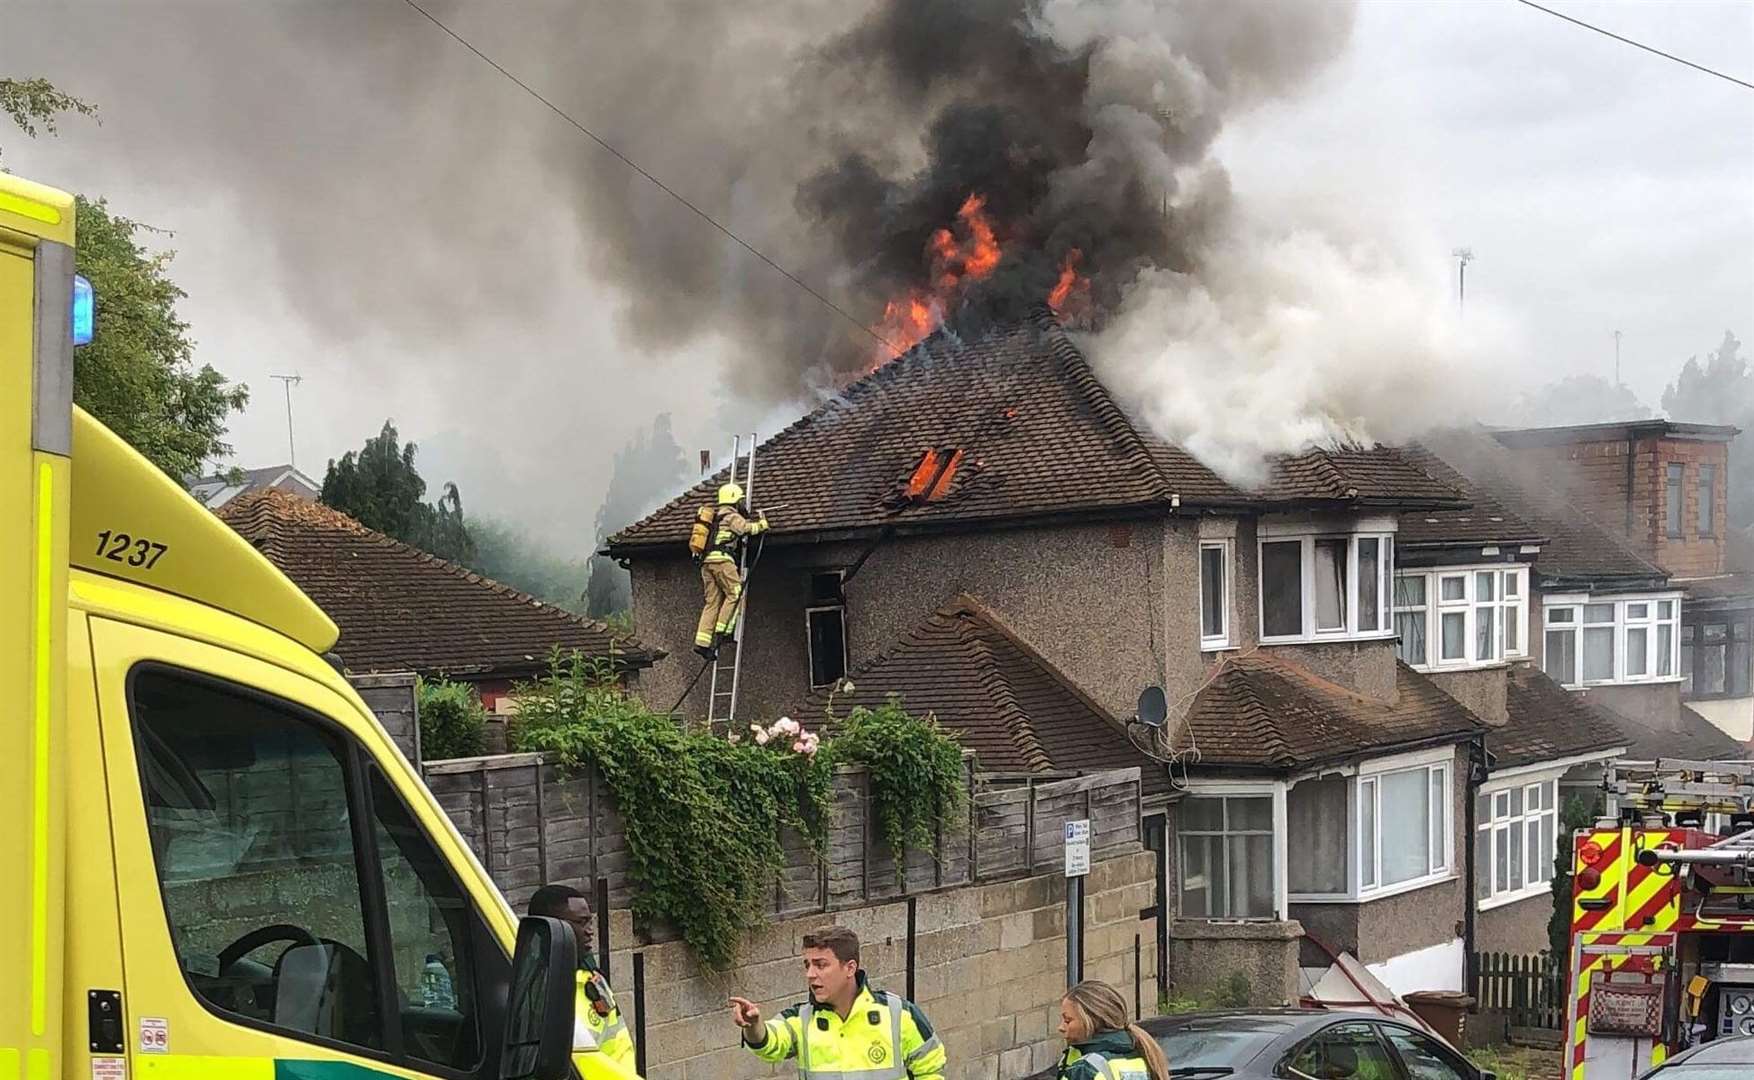 Emergency crews at the scene of a house fire in Grosvenor Avenue, Chatham (13491731)